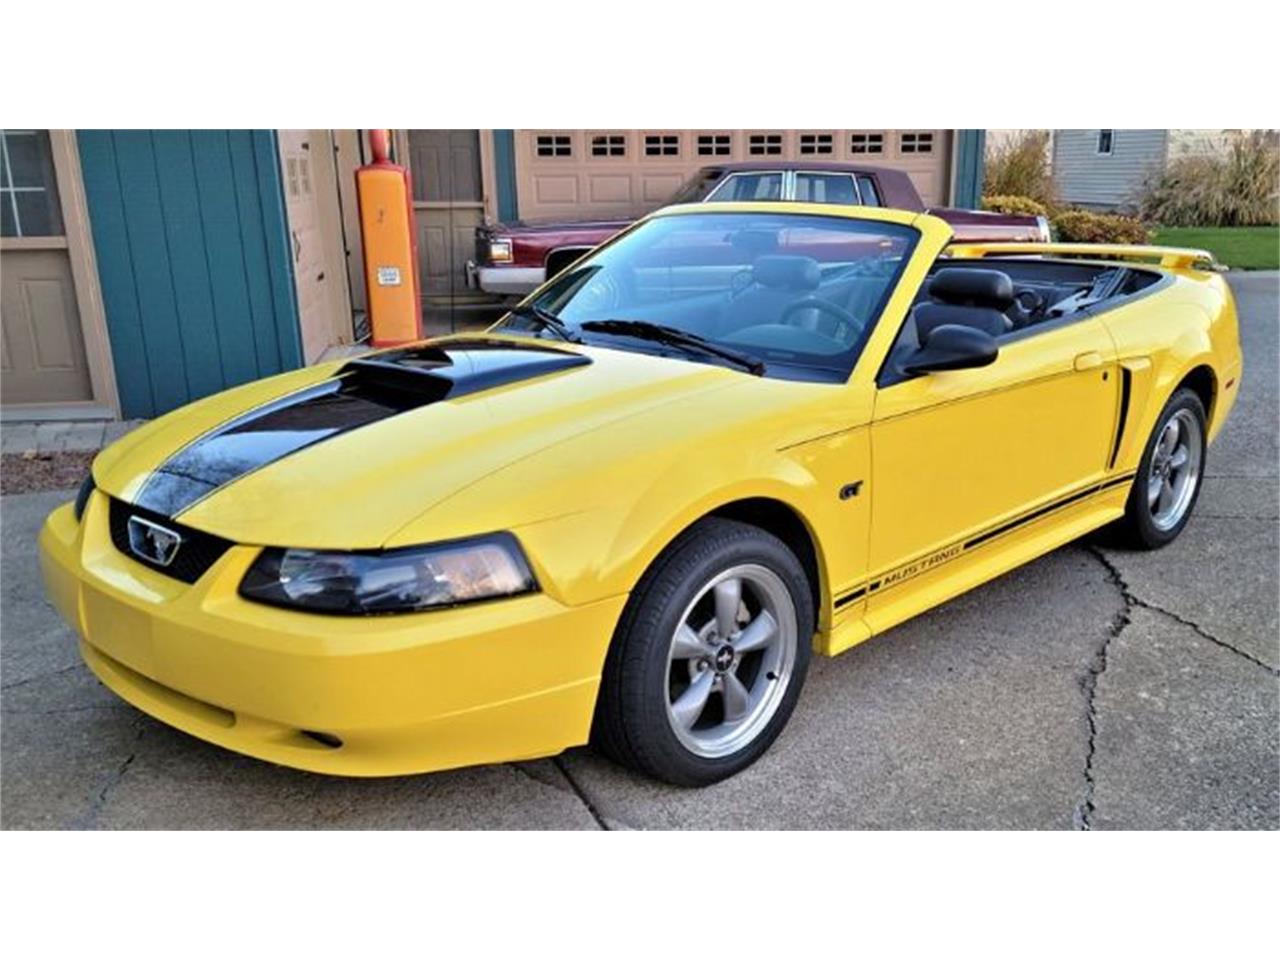 For Sale: 2001 Ford Mustang in Cadillac, Michigan for sale in Cadillac, MI